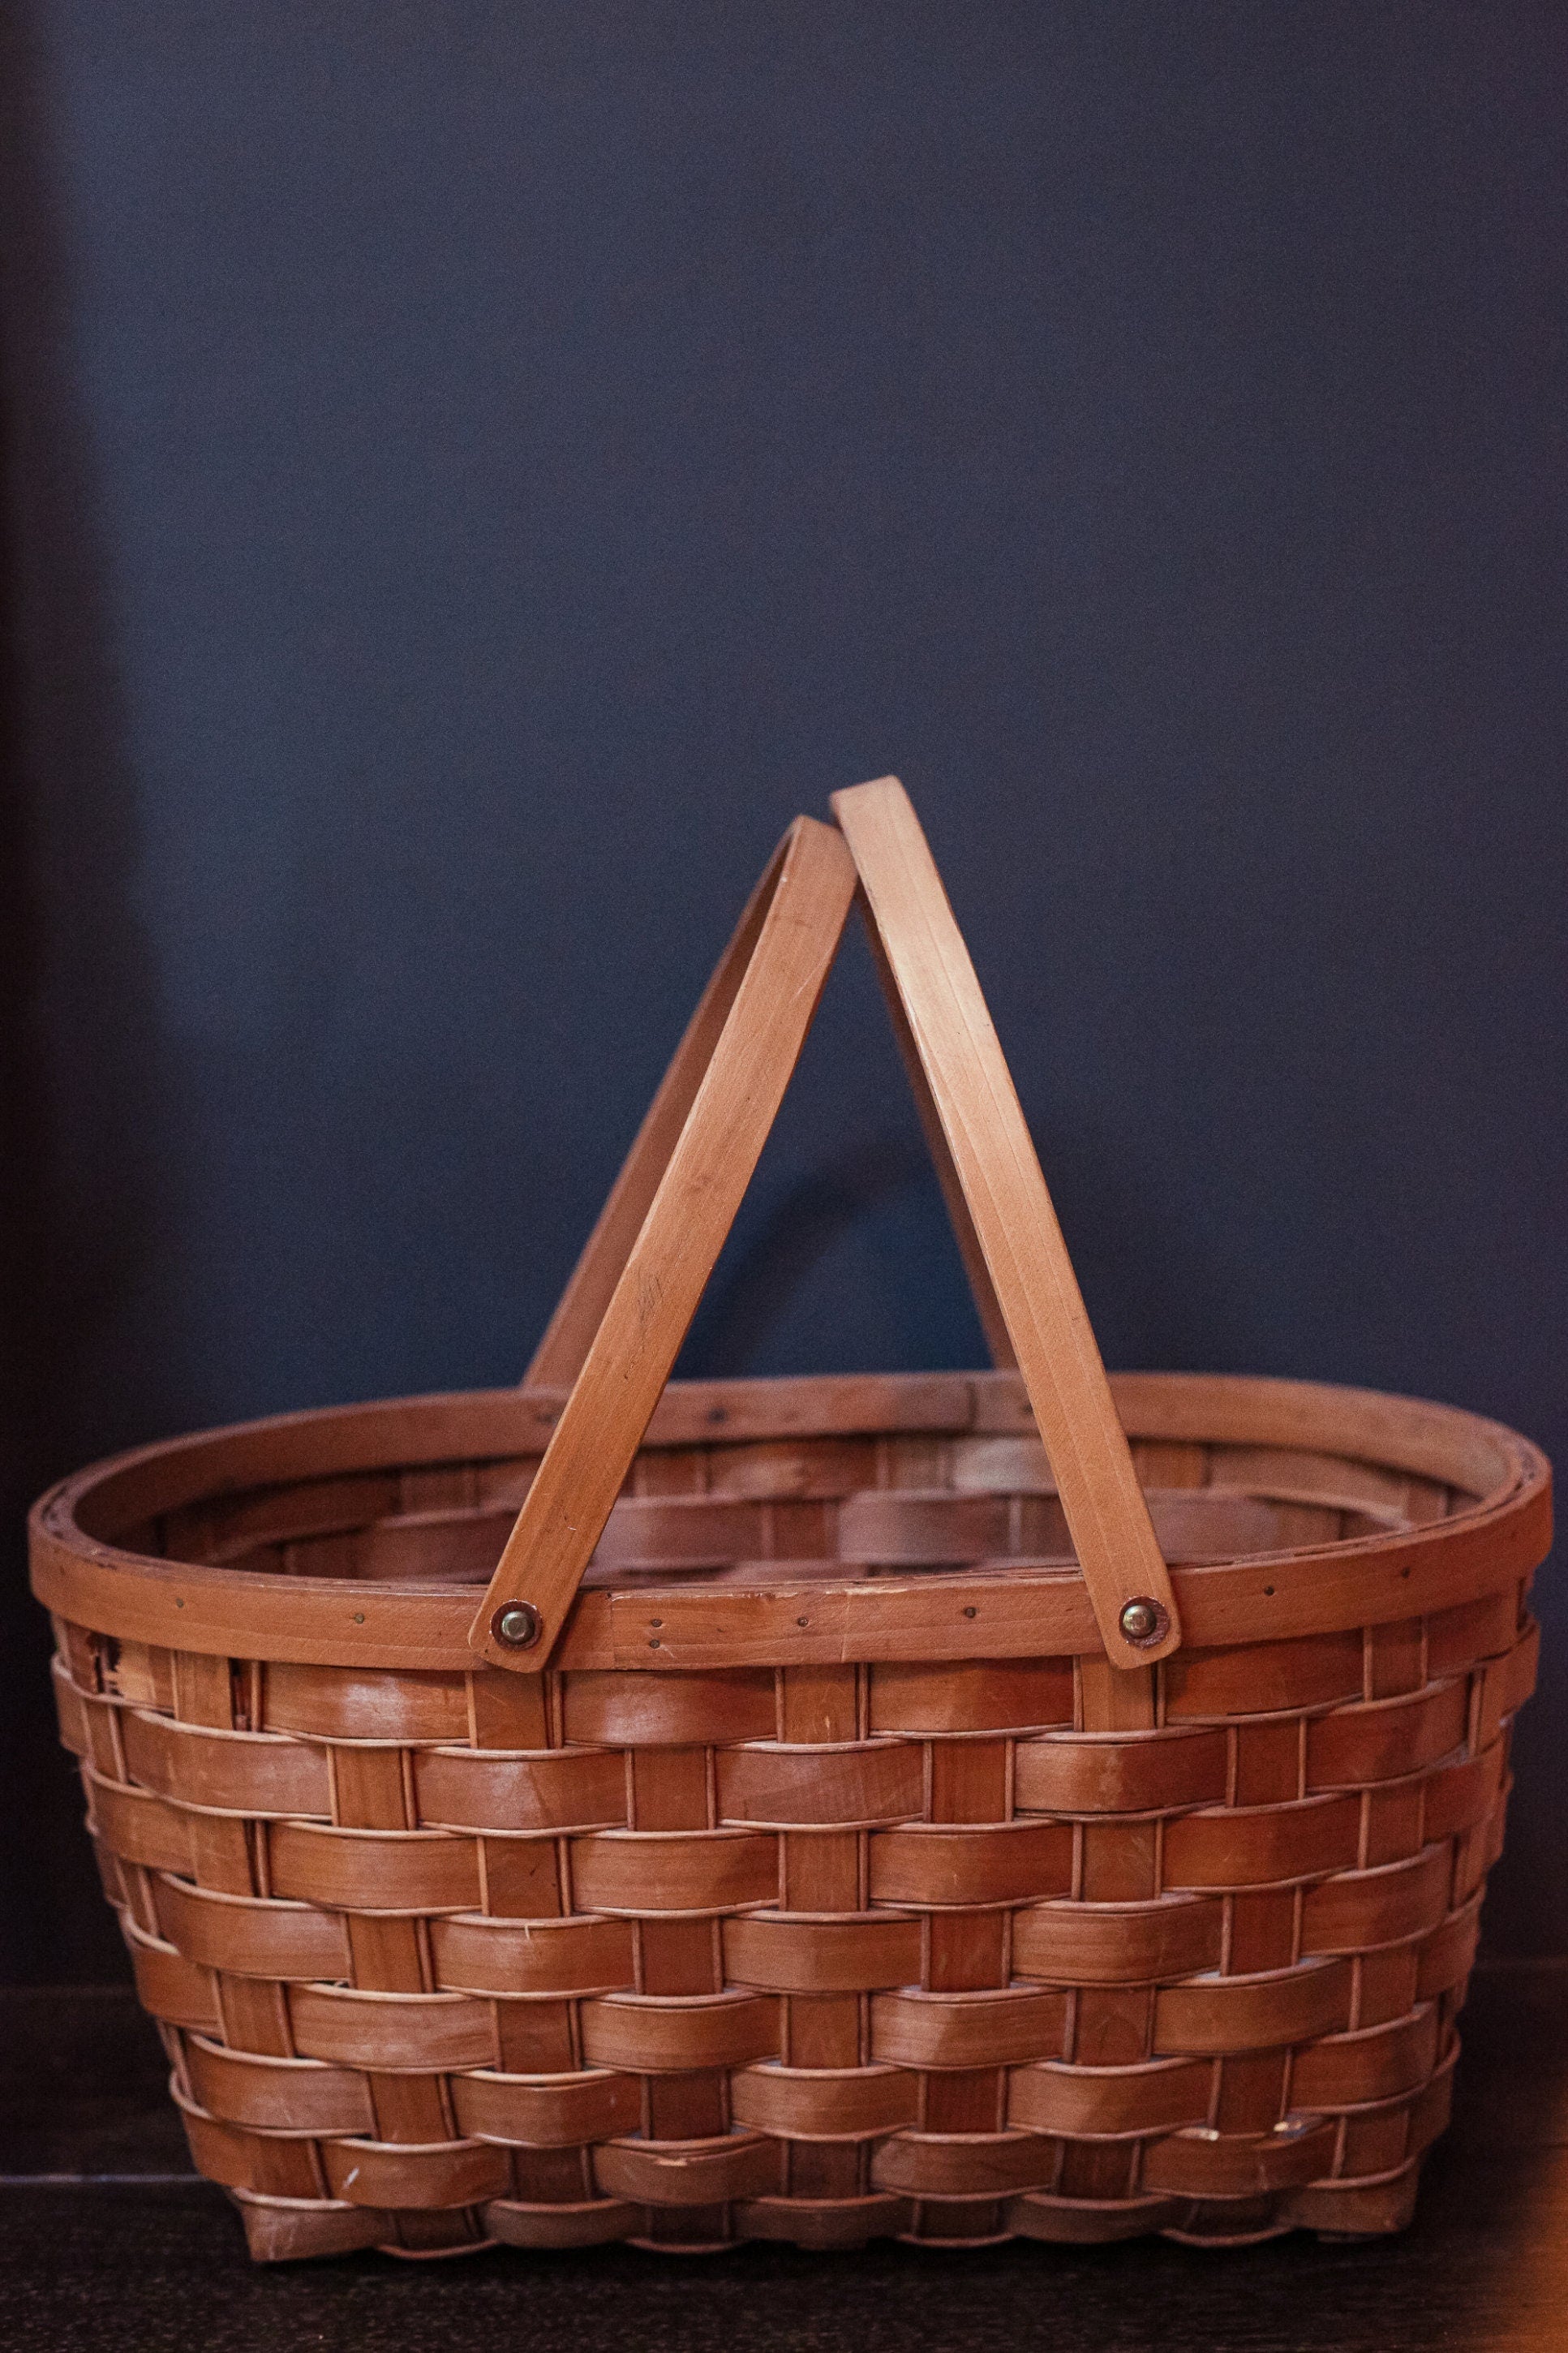 Extra Large Splint Rattan & Wood Market Basket with Swing Handles - Woven Wood Country Gathering Shopping Basket